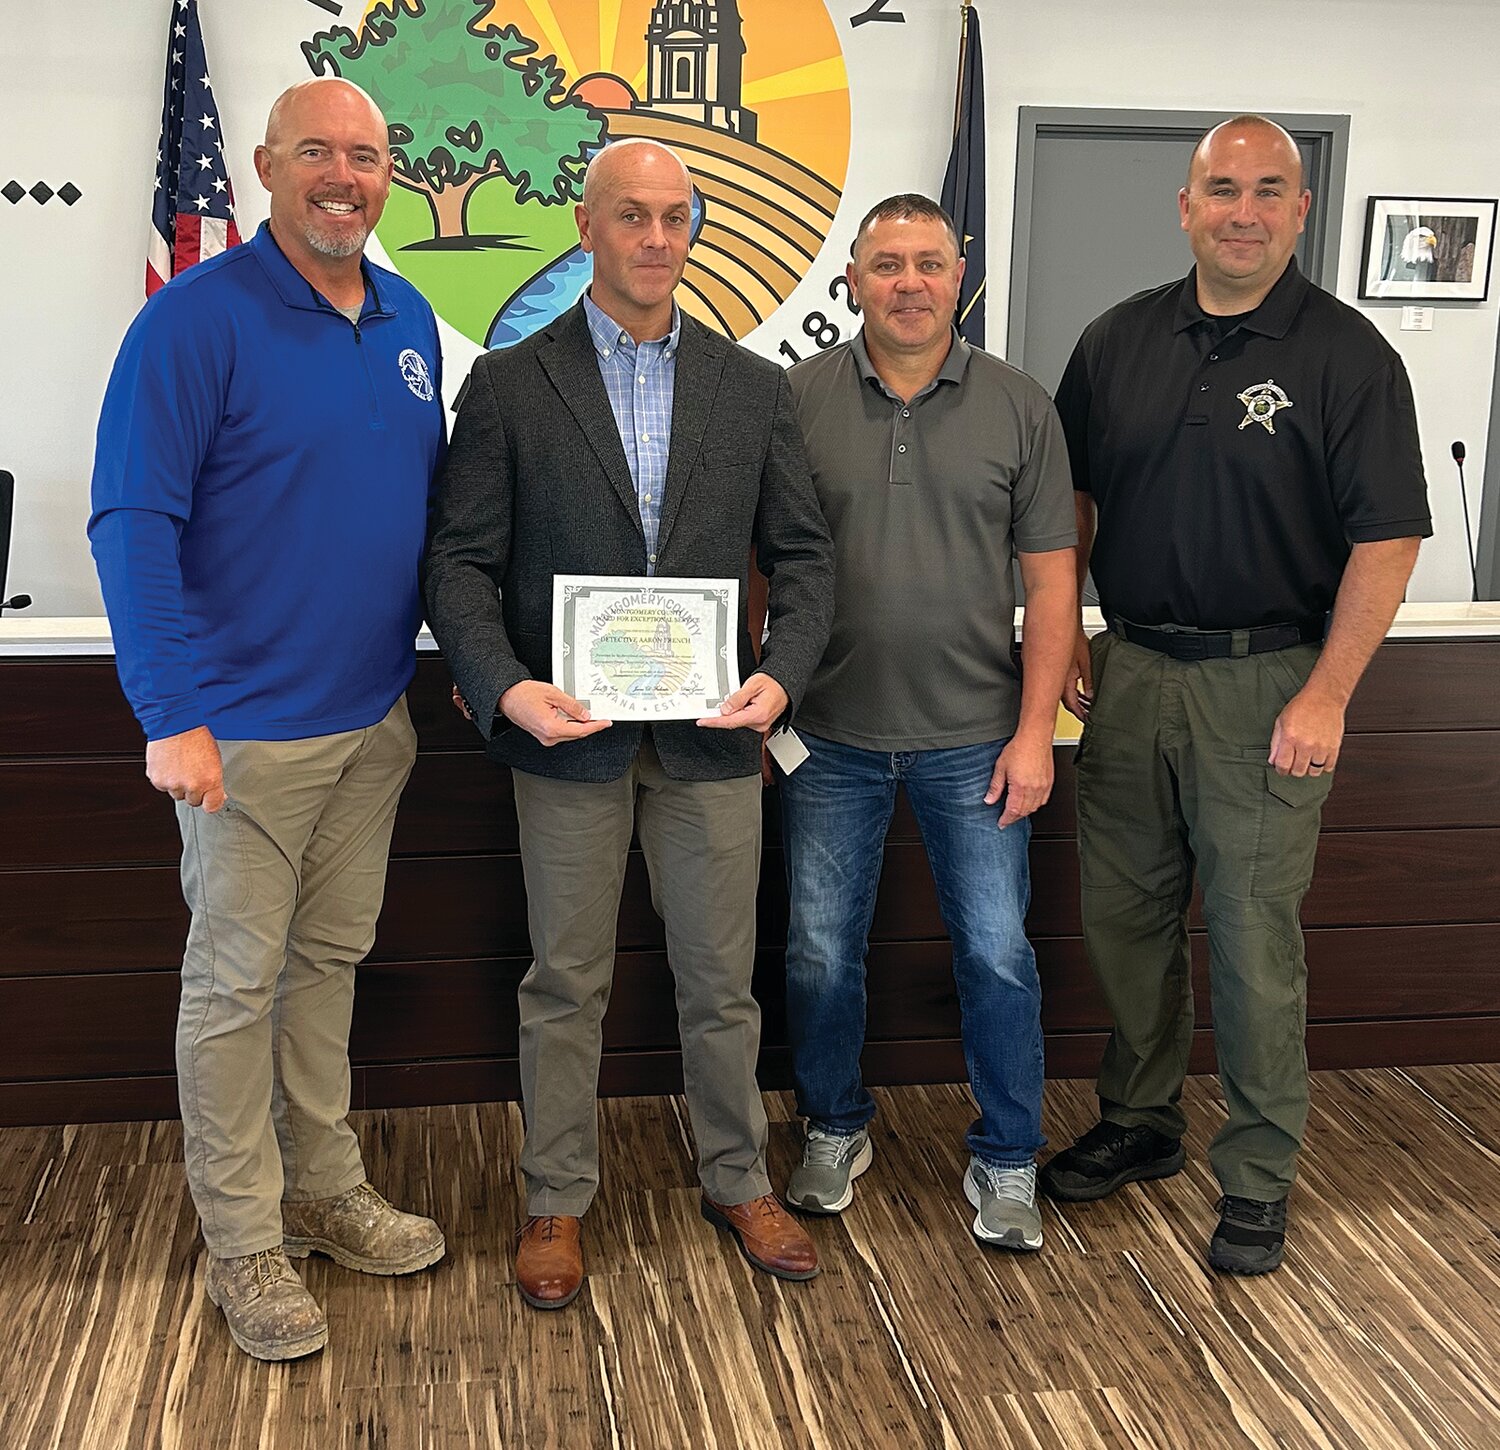 Montgomery County Sheriff Detective Aaron French, second from left, was presented Tuesday with a certificate of appreciation for his work on a multi-state child pornography and child exploitation case. The investigation resulted in the perpetrator receiving a 90-year prison sentence. Also pictured are Montgomery County Commissioners Dan Guard and Jim Fulwider and Montgomery County Sheriff Ryan Needham.